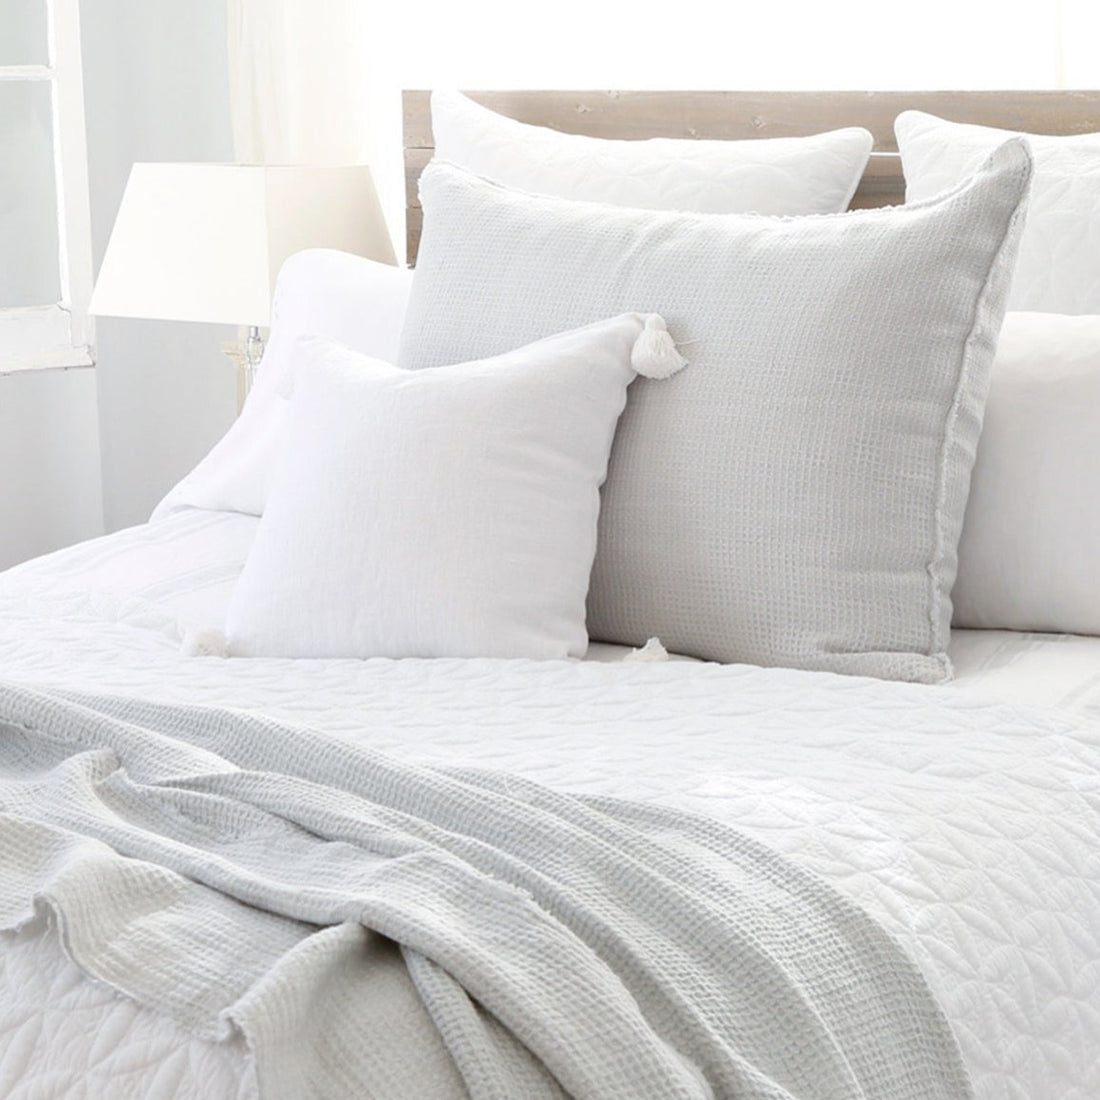 Montauk Square Pillow with Tassels, Pure White